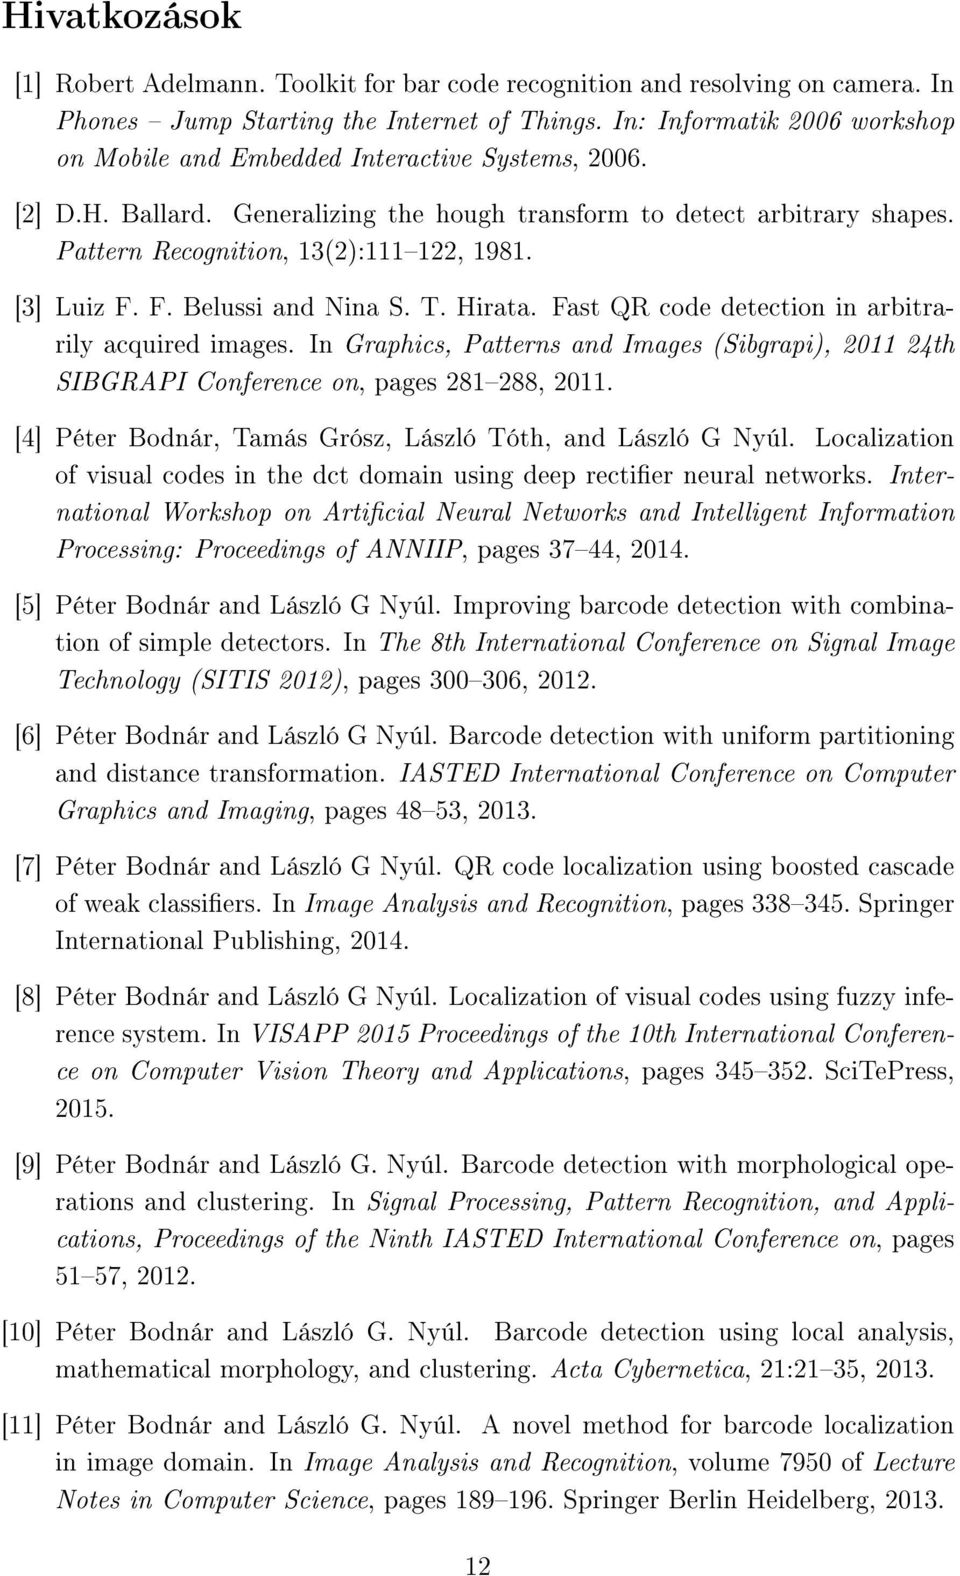 [3] Luiz F. F. Belussi and Nina S. T. Hirata. Fast QR code detection in arbitrarily acquired images. In Graphics, Patterns and Images (Sibgrapi), 2011 24th SIBGRAPI Conference on, pages 281288, 2011.